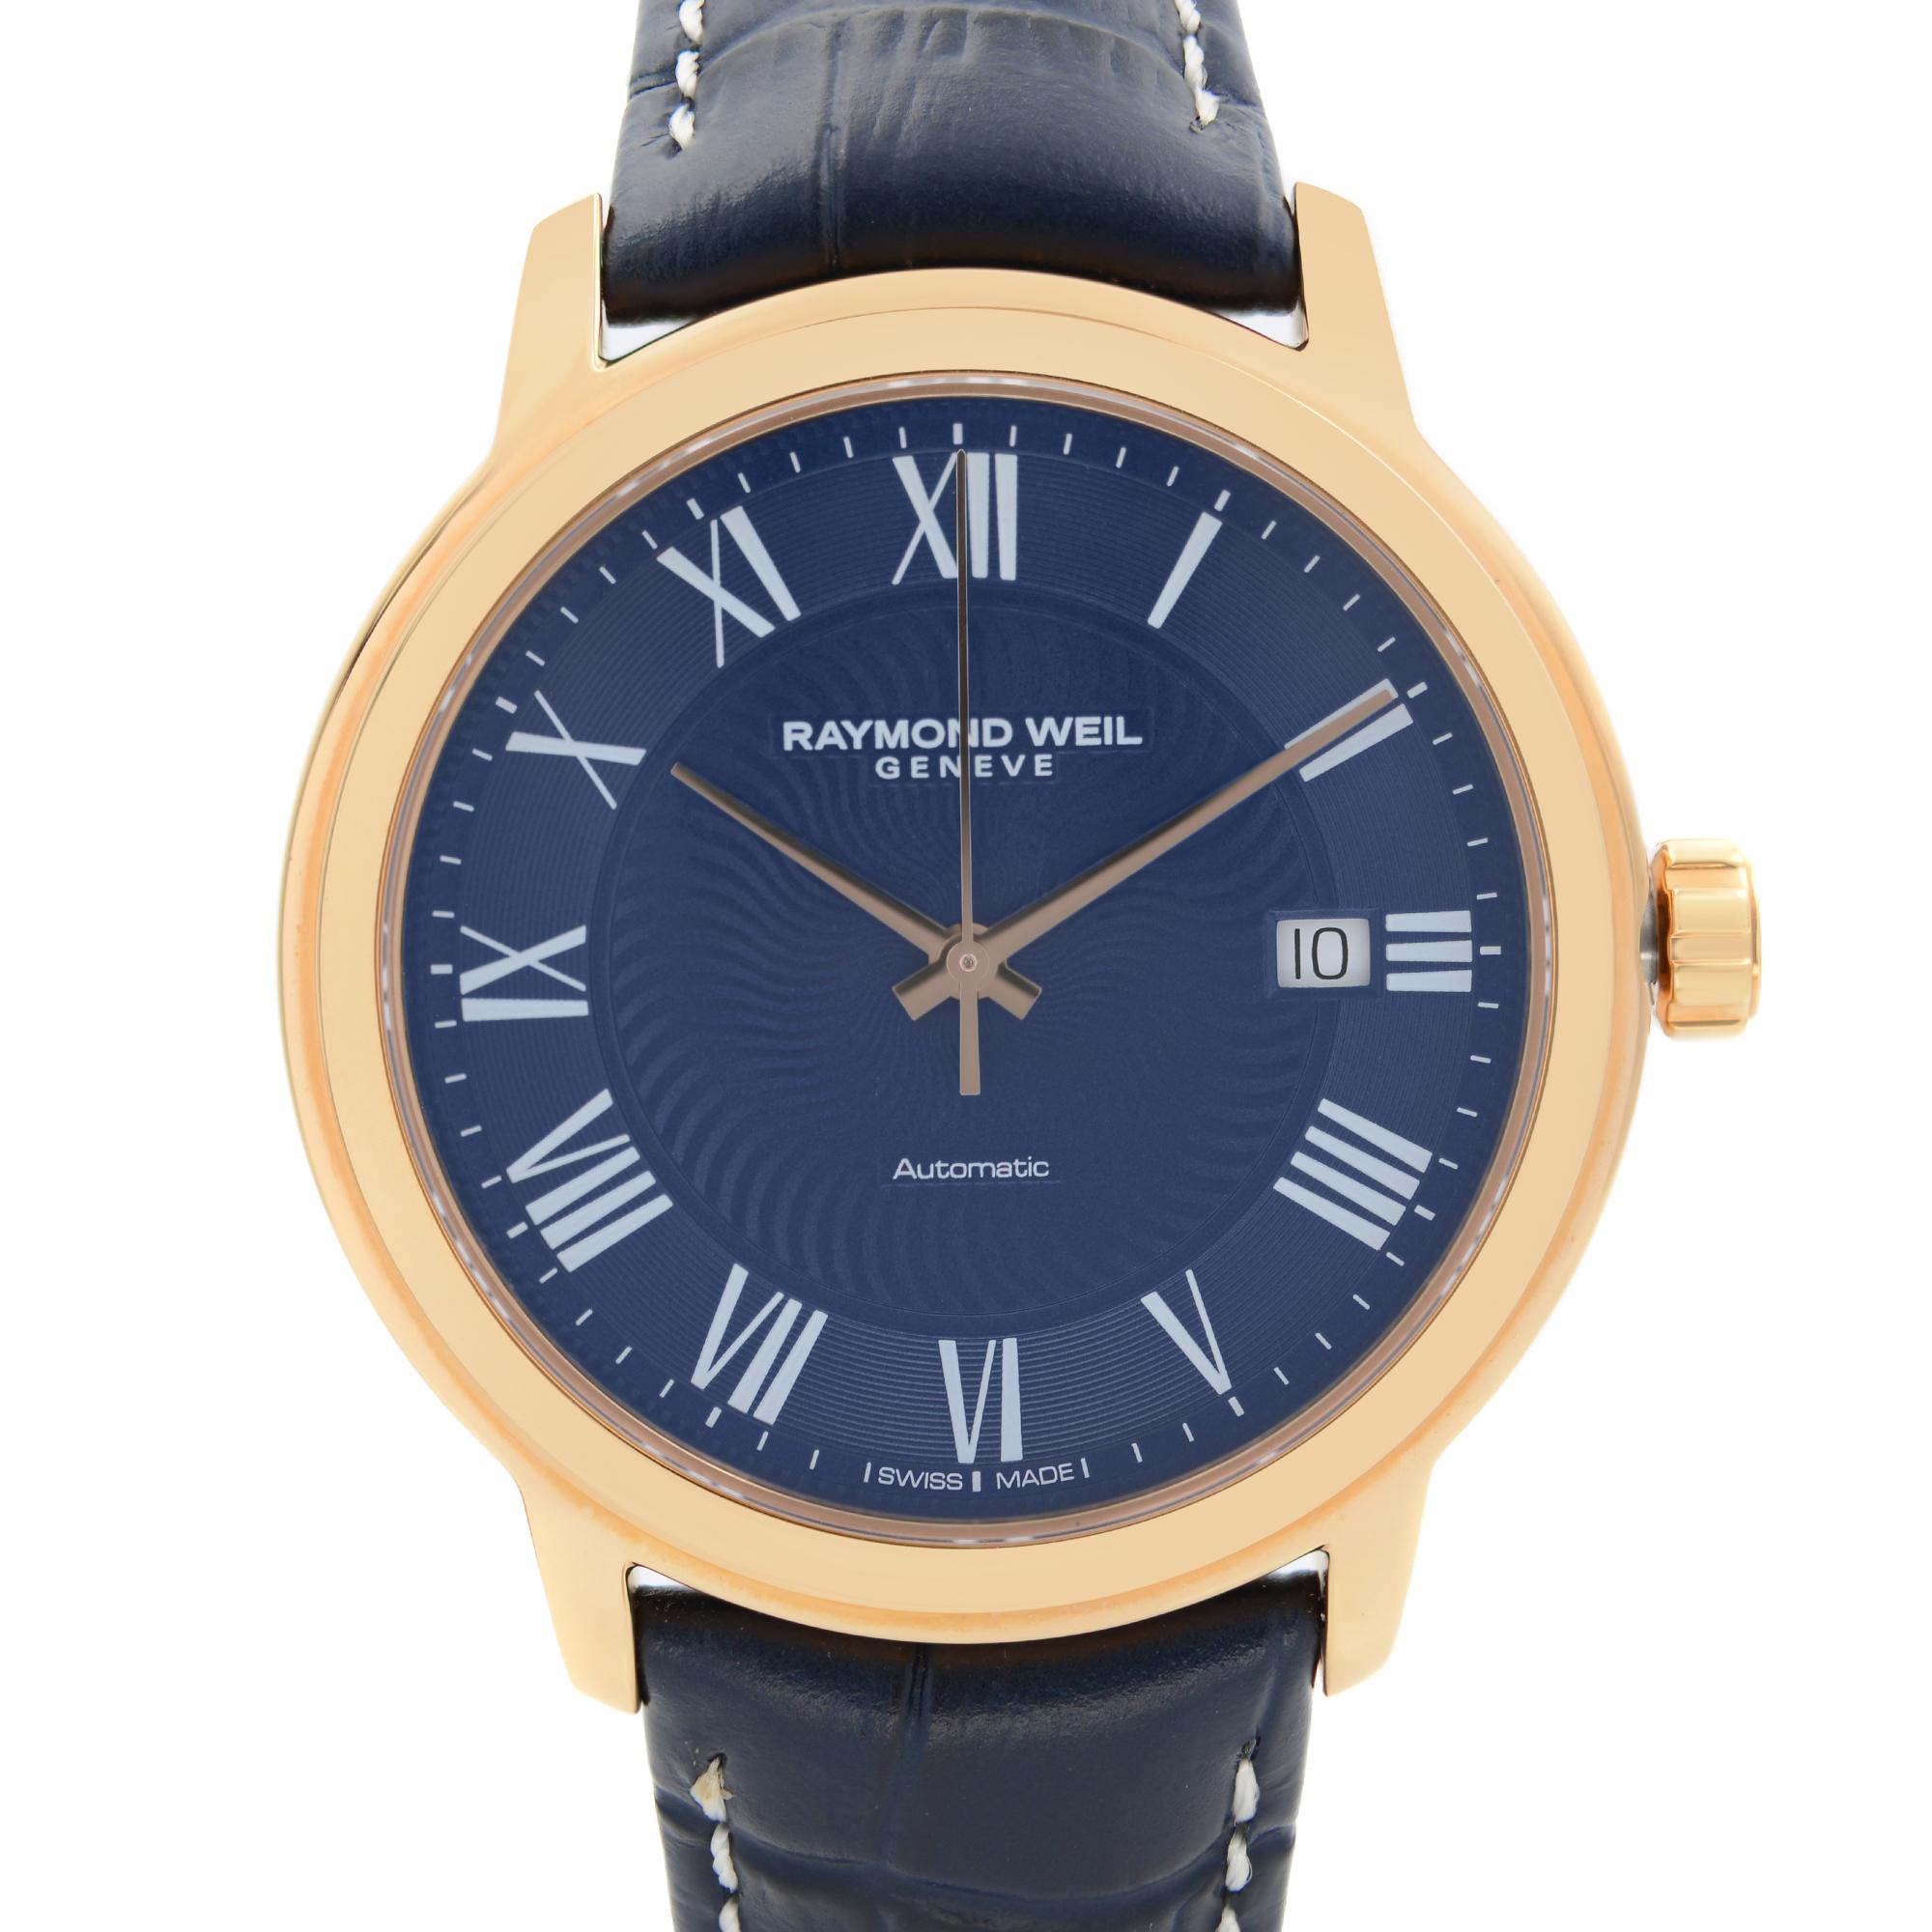 Never Worn Store Display Model.  Raymond Weil Maestro Rose Gold PVD Steel Blue Dial Men's Watch 2237-PC5-00508.  Gold-tone parts and the band can have minor blemishes and Micro scratches During store display and handling. This Beautiful Timepiece